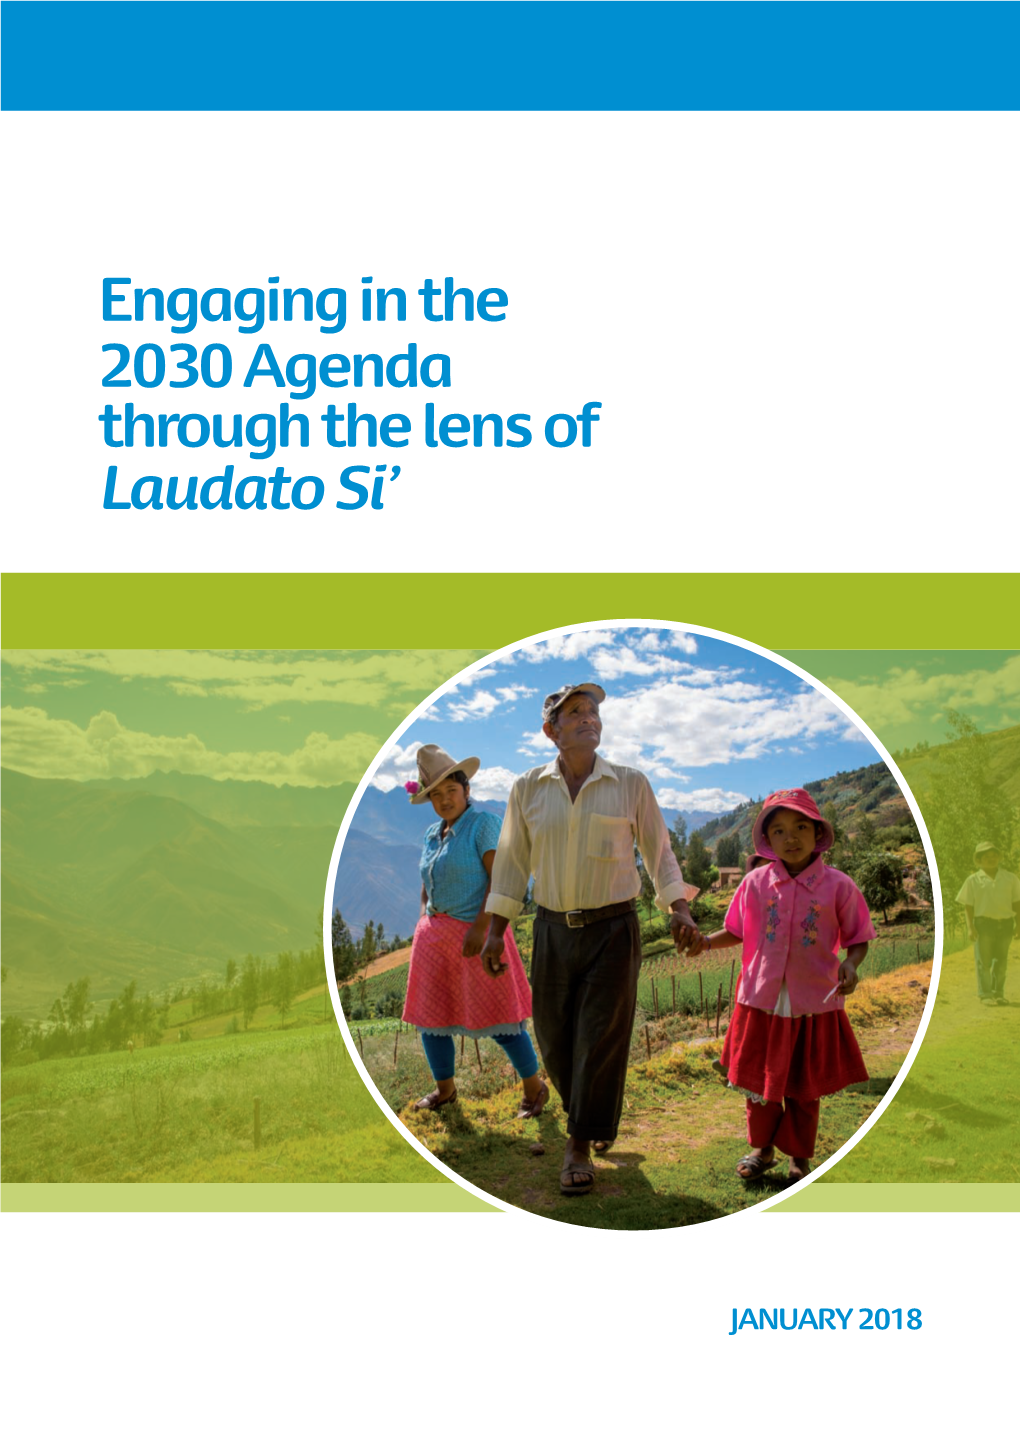 Engaging in the 2030 Agenda Through the Lens of Laudato Si’